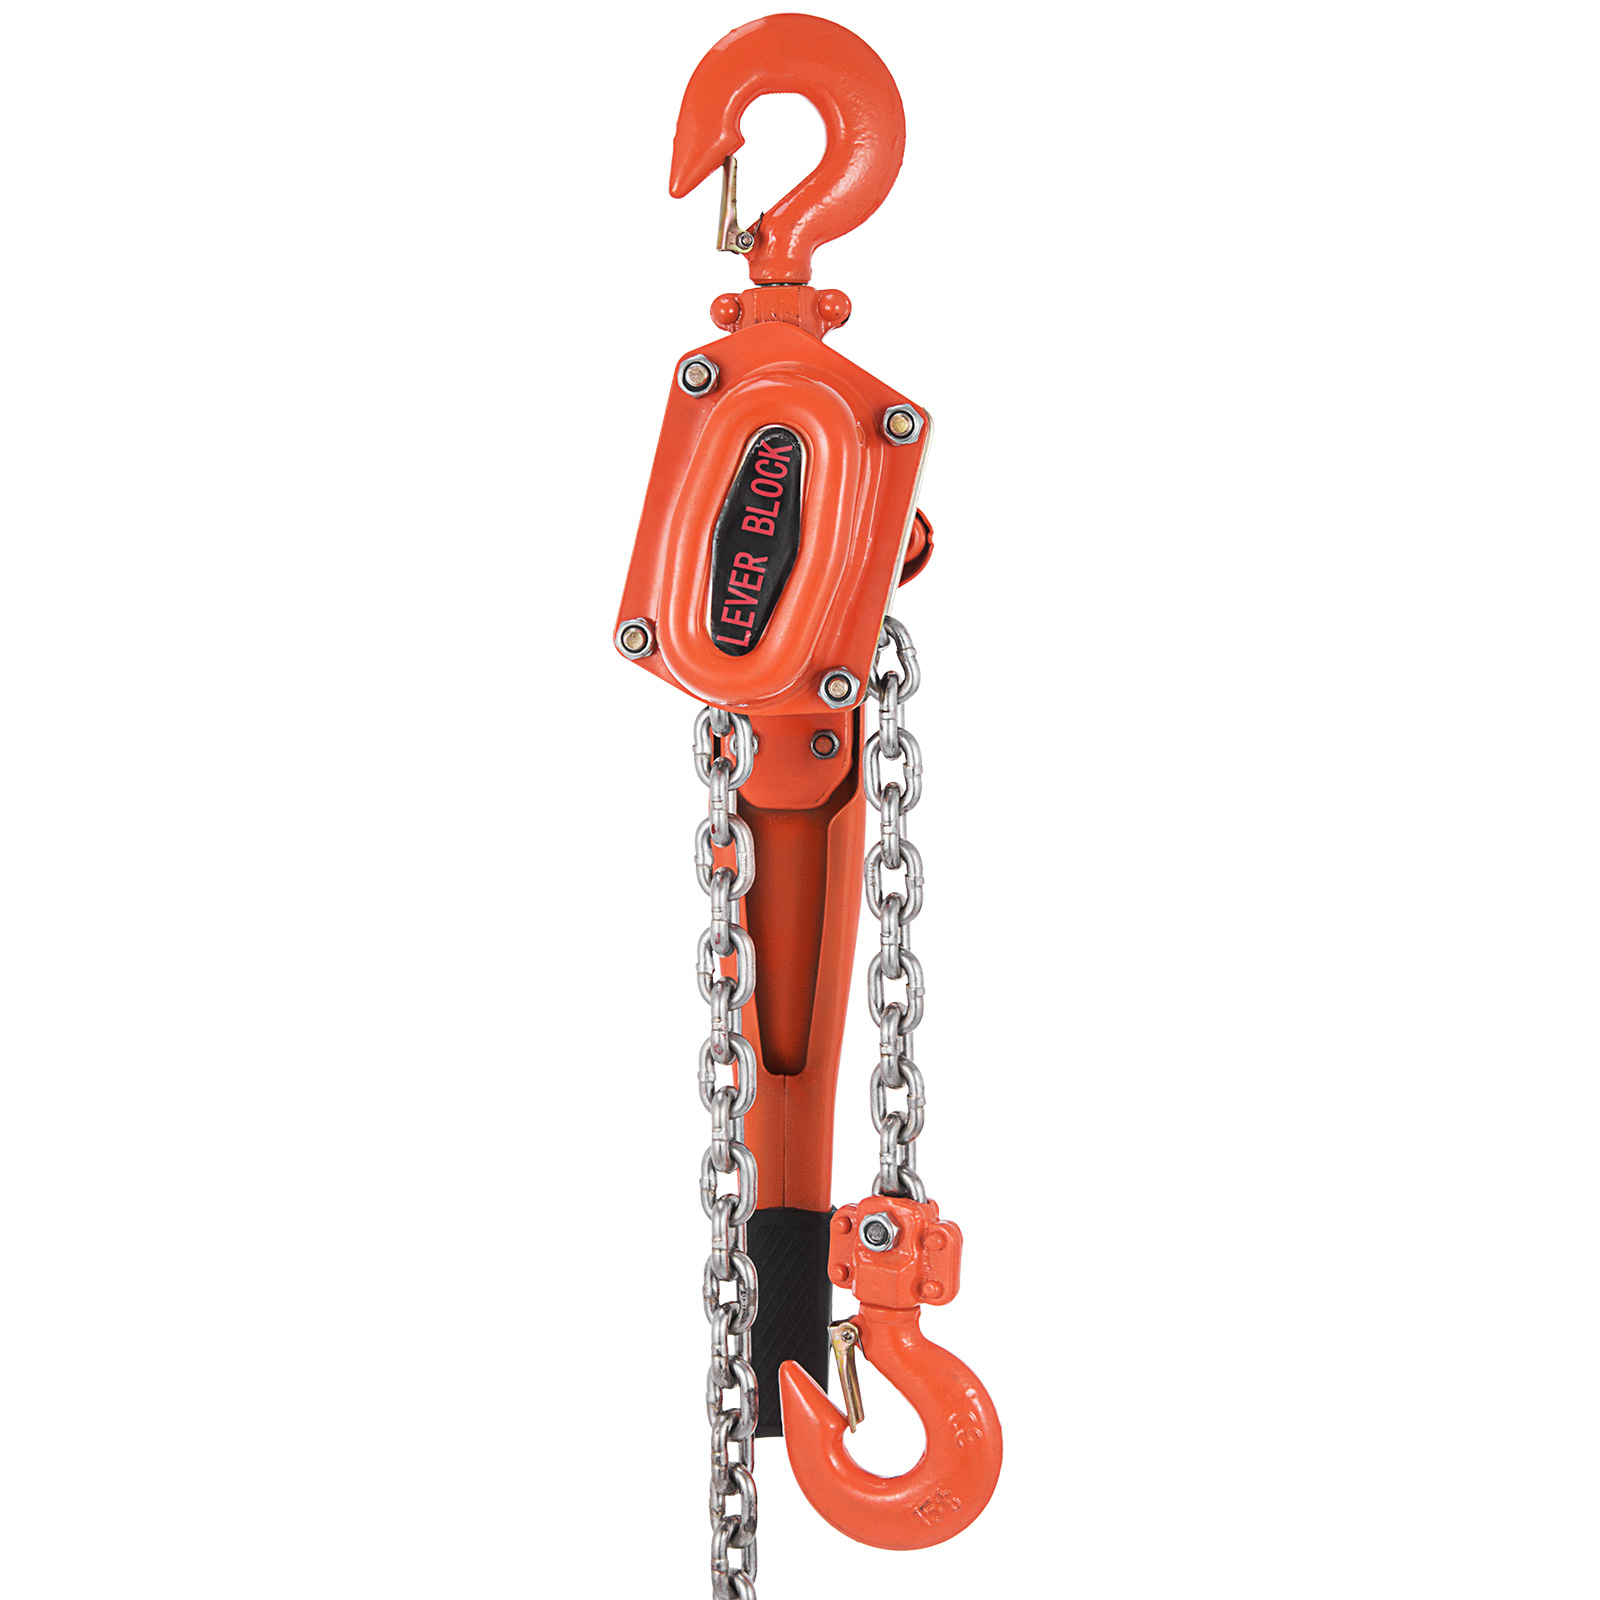 Fencia 1.5 Ton Lift Lever Block Chain Hoist 5FT Chain Come Along Portable Ratchet Puller Hoists for Lifting【US Shipping】 